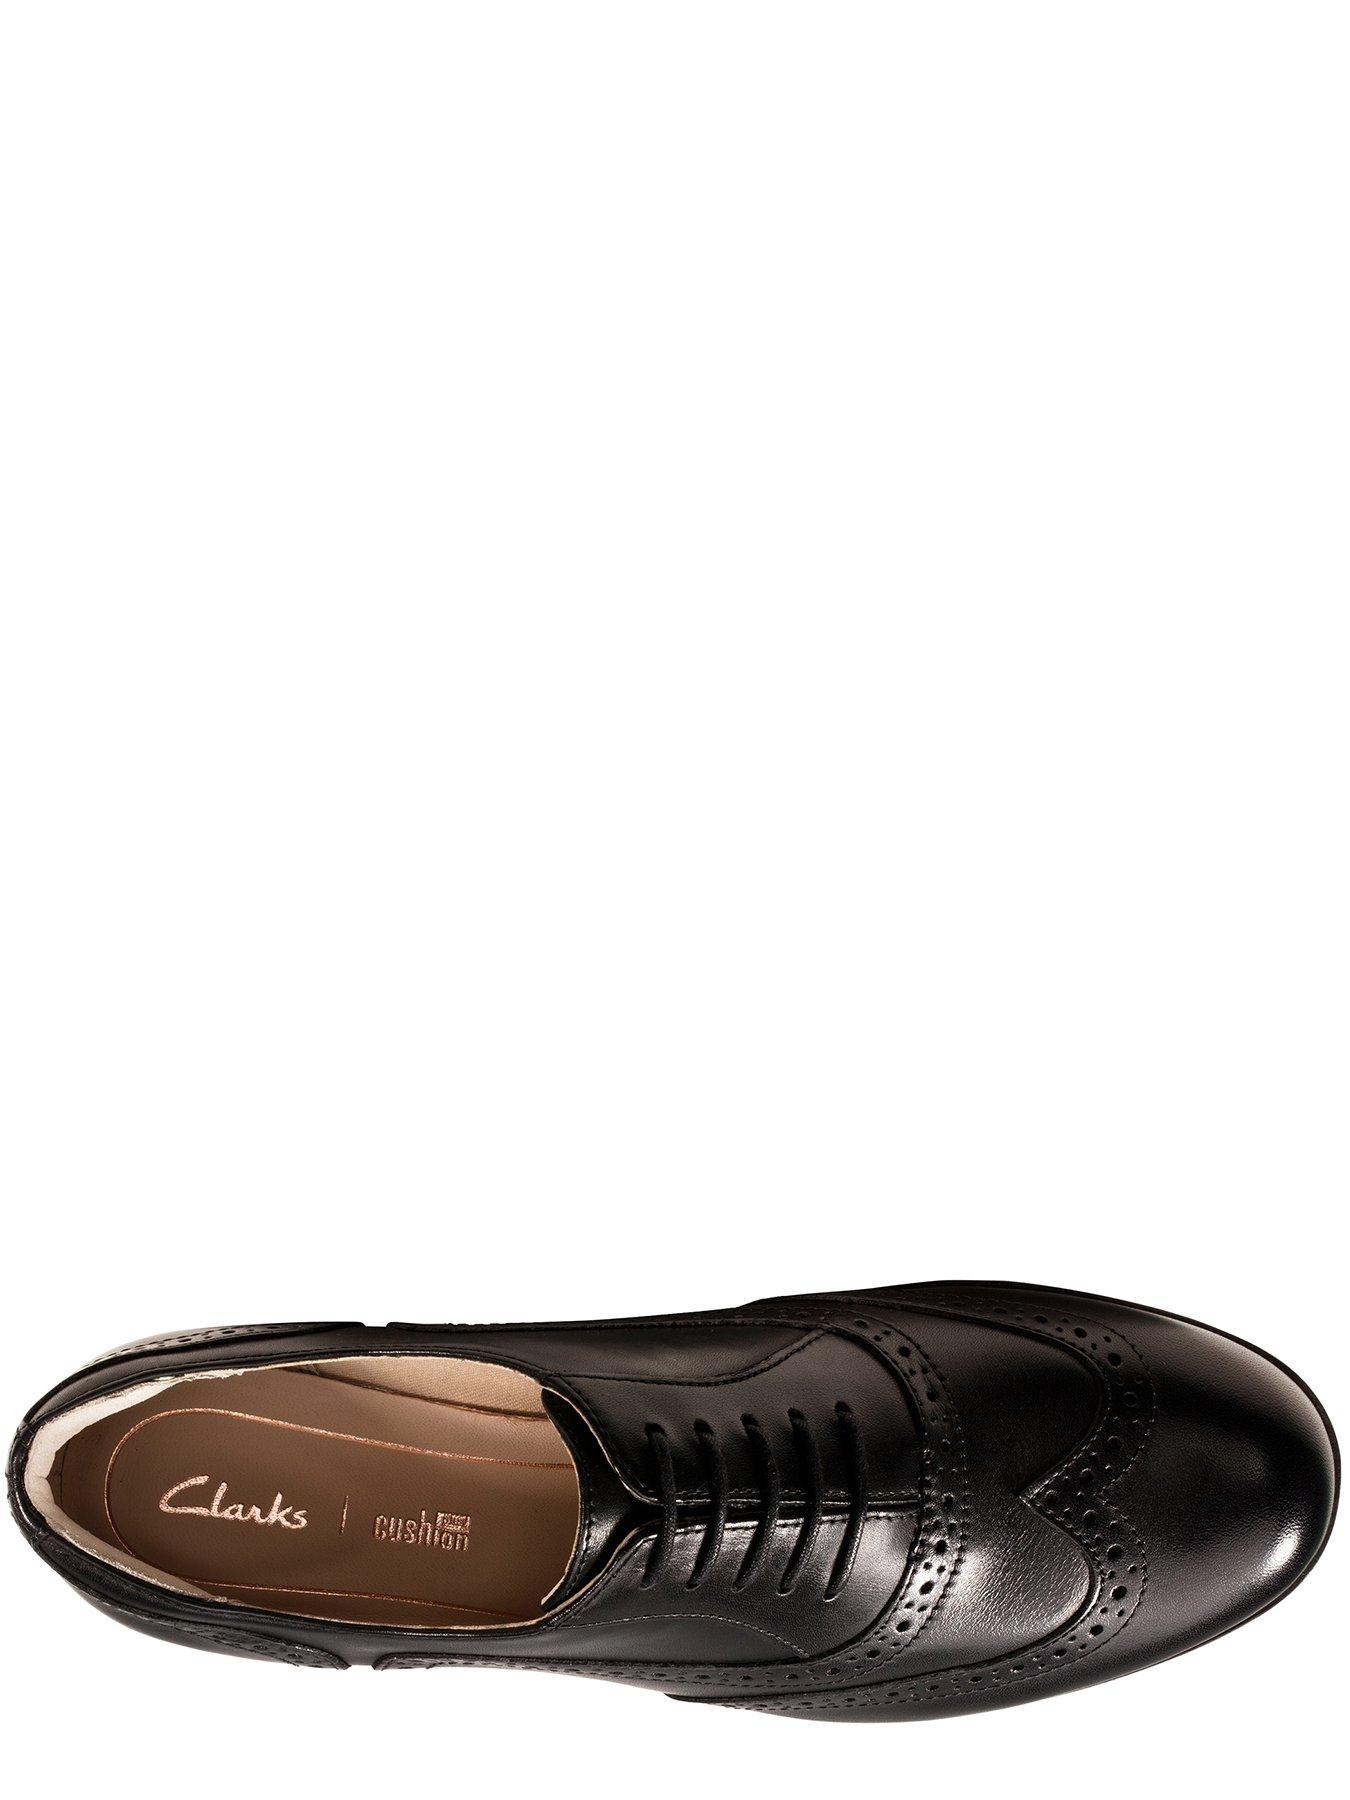 clarks wide fit brogues